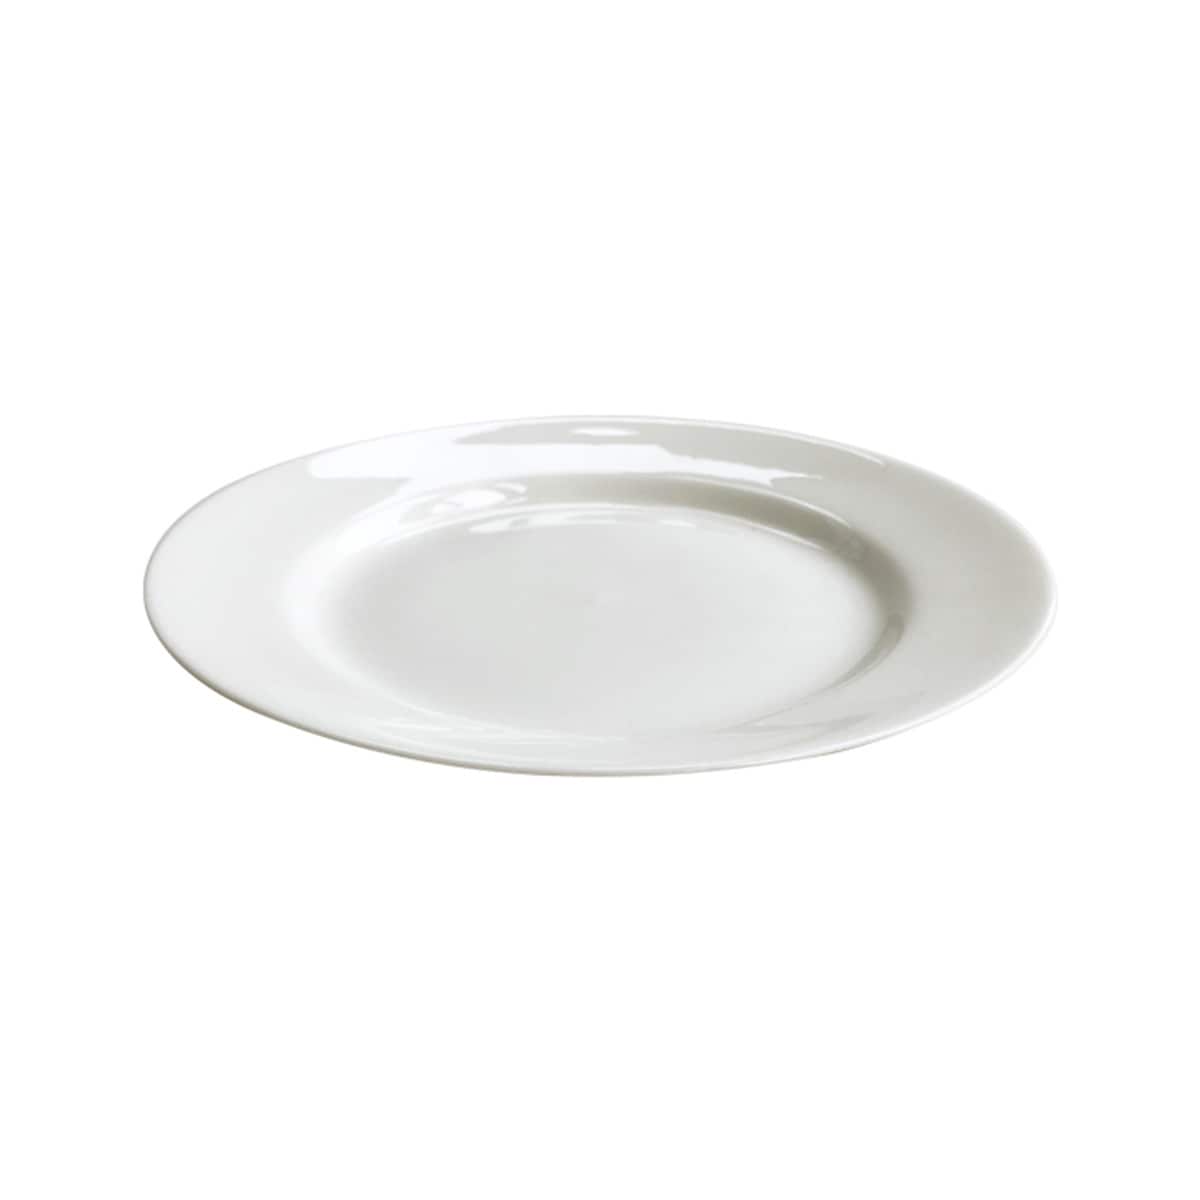 Plate BAS white - 2 pack